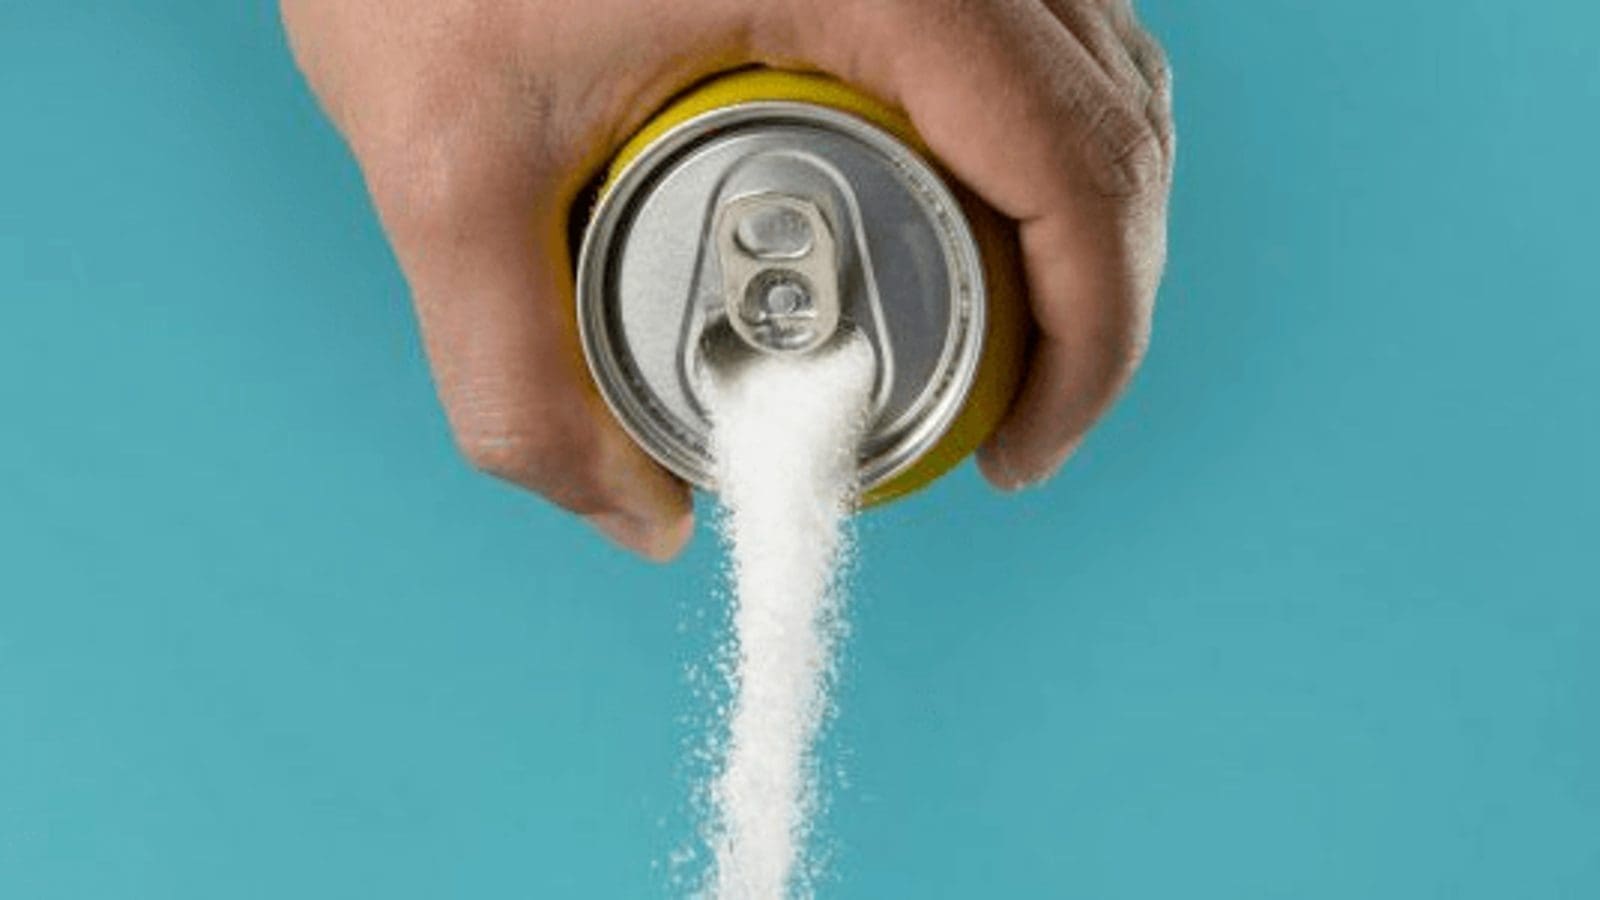 European soft drinks sector surpasses EU target for reduction in added sugars: UNESDA